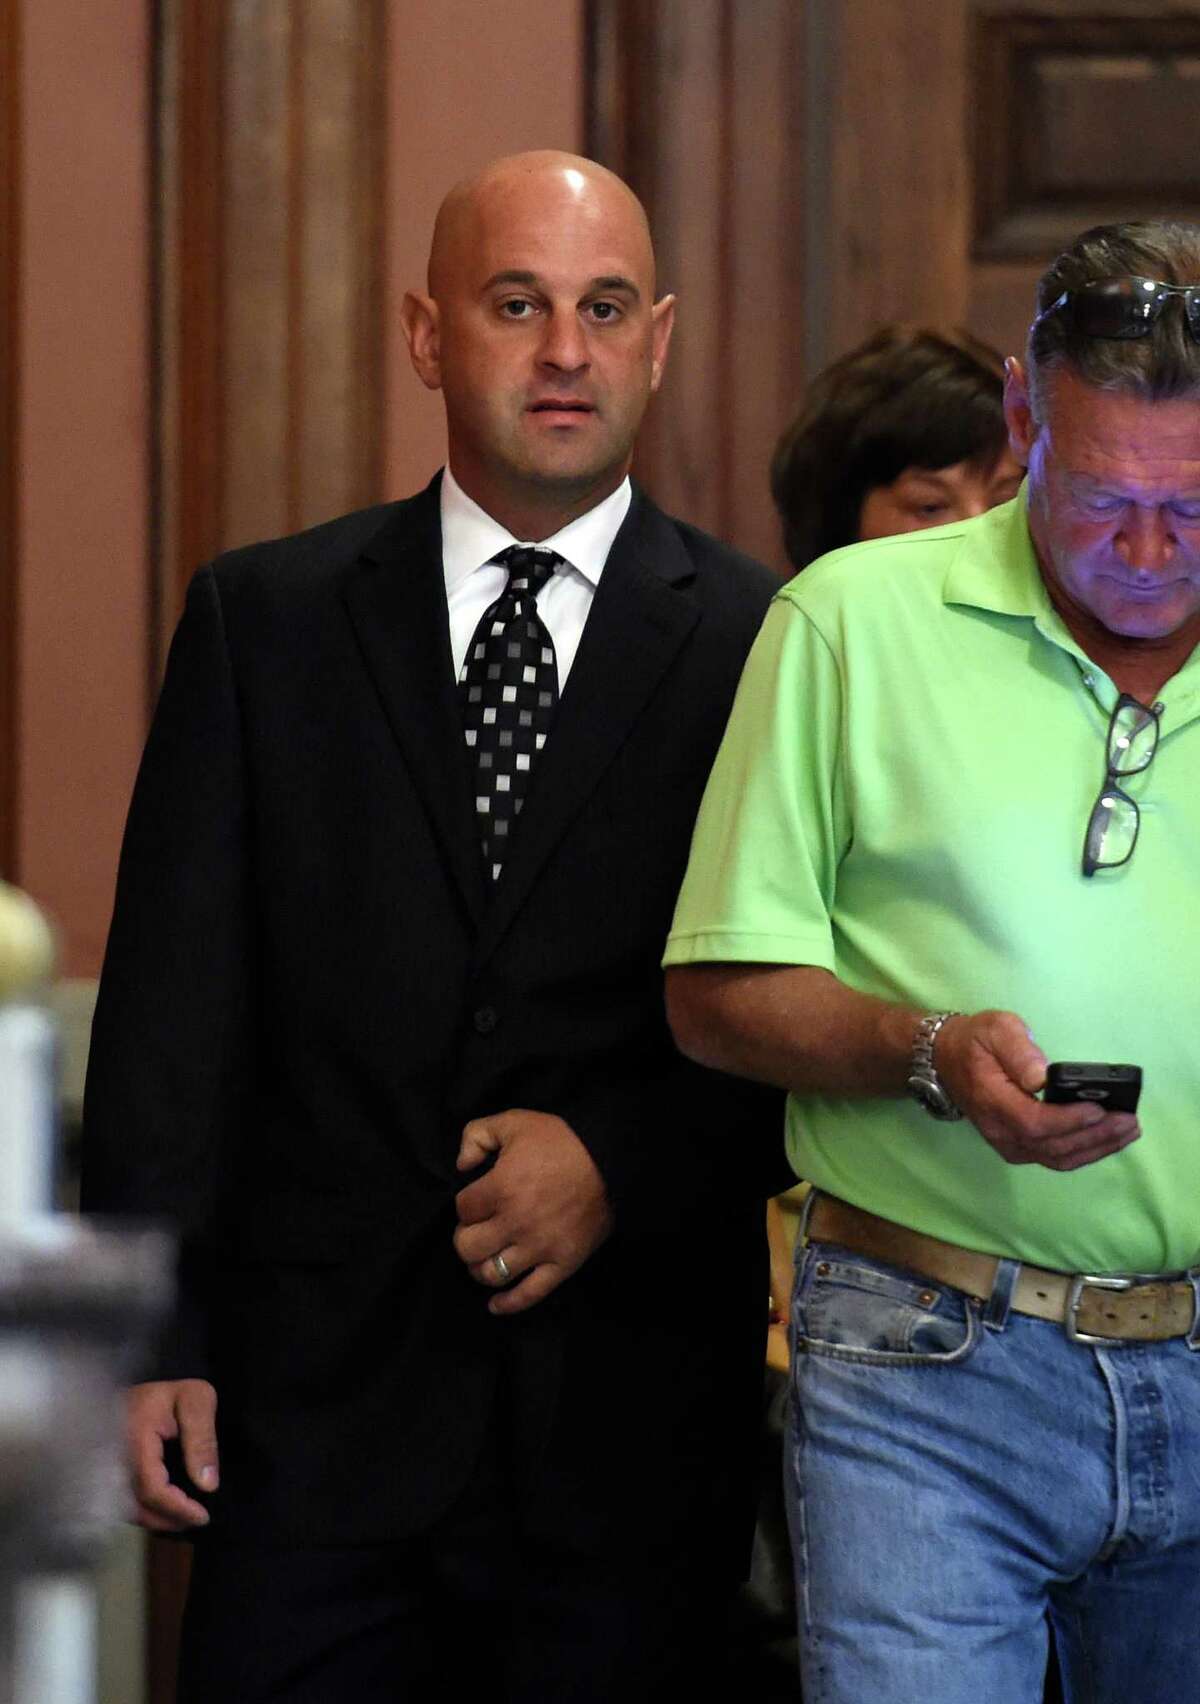 Former Troy Police officer Brian Gross arrives for his sentencing in Rensselaer County Court Thursday morning Sept. 17, 2015 in Troy, N.Y. Brian Gross, 33, of North Greenbush, who was assigned to the Community Narcotics Enforcement Team, was sentenced by Judge Andrew Ceresia. In June, Gross admitted his guilt to Ceresia during a plea. (Skip Dickstein/Times Union)